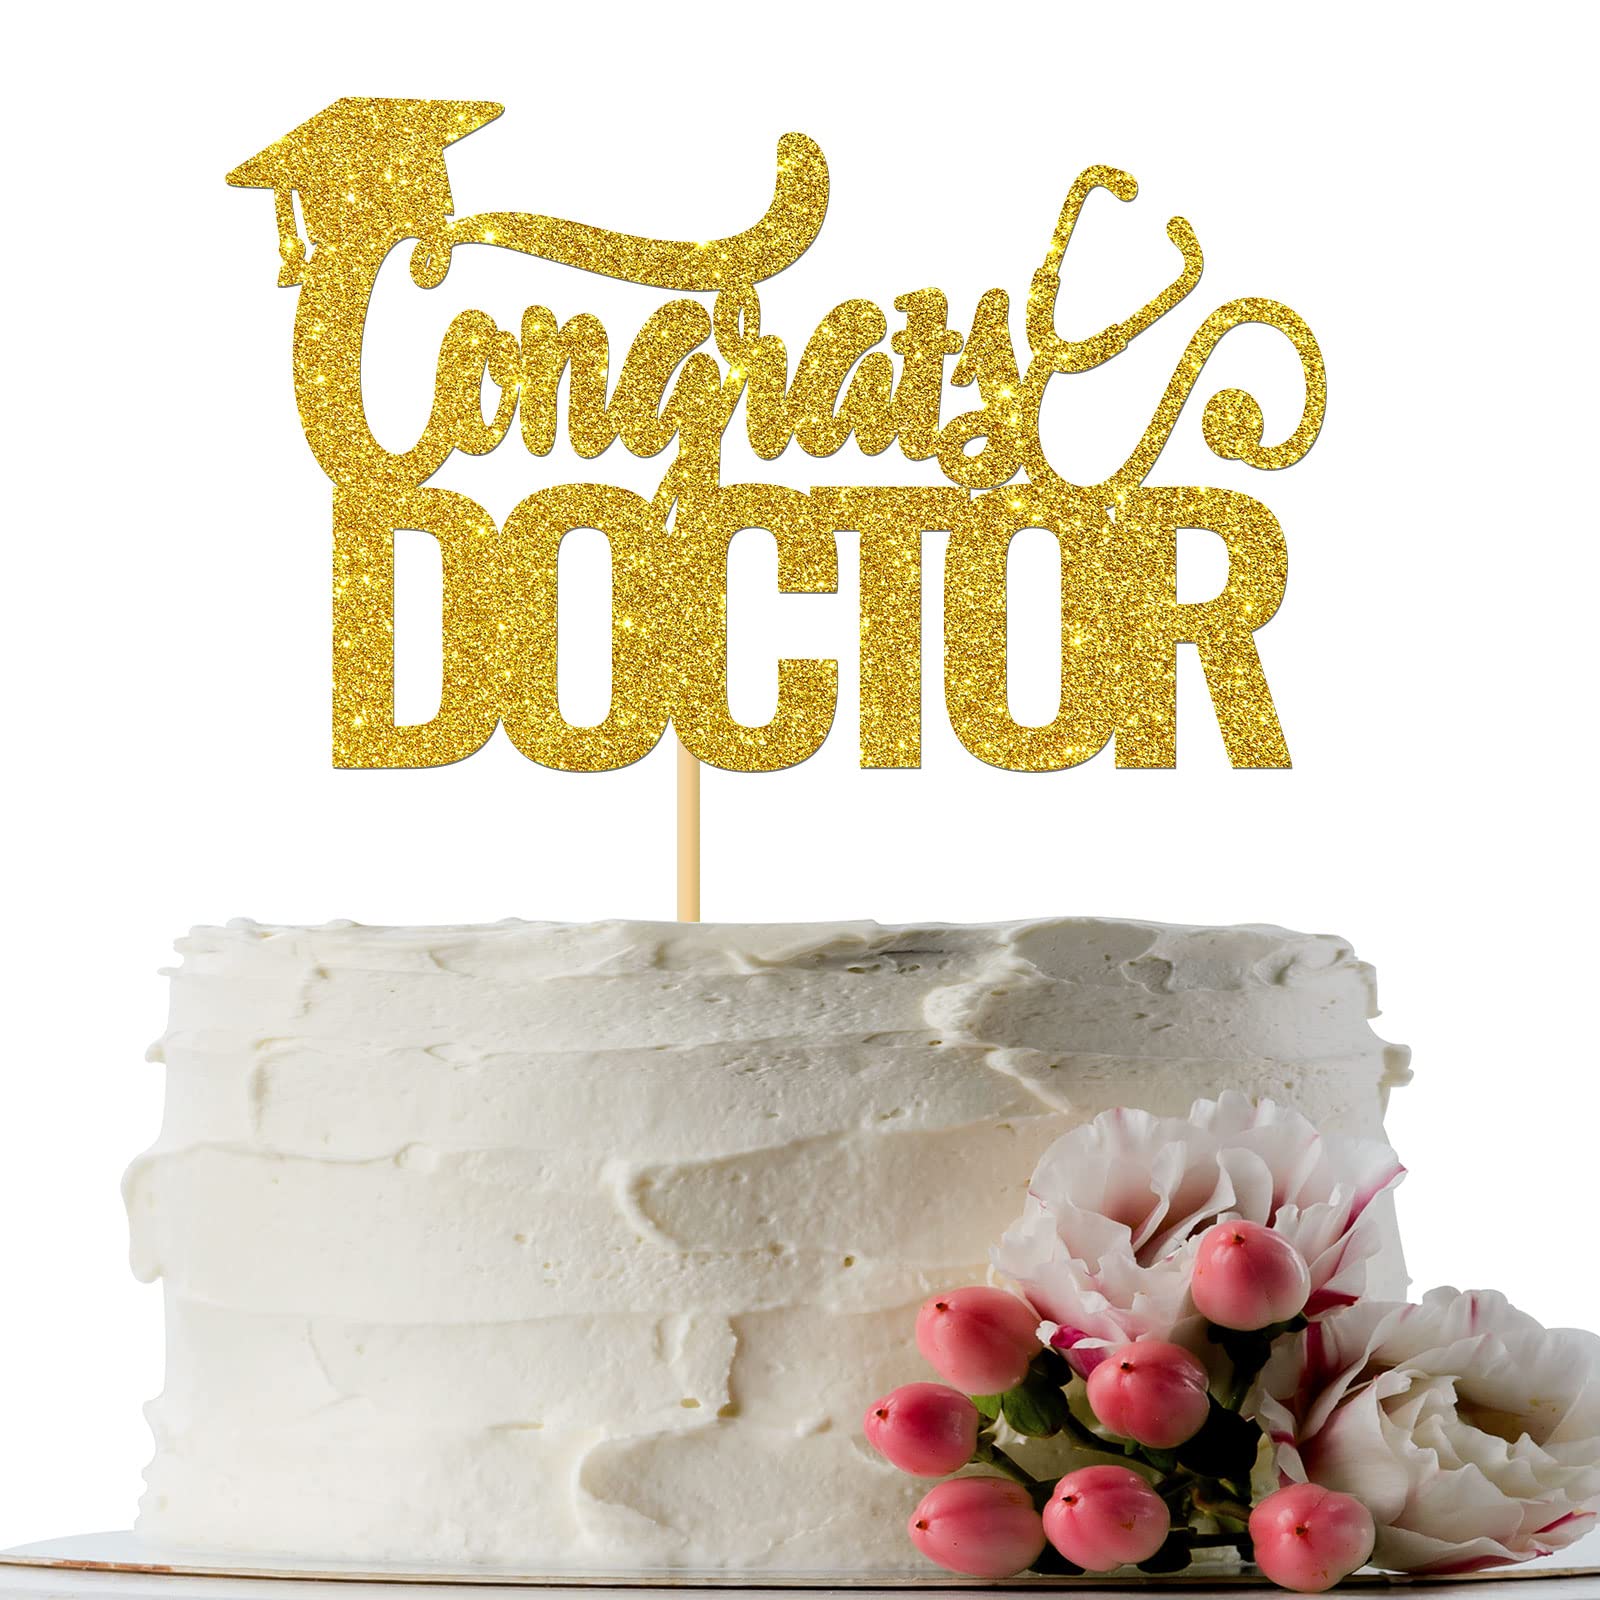 Mr & Mrs Gold Cake Topper | Wedding Party | Party Fever